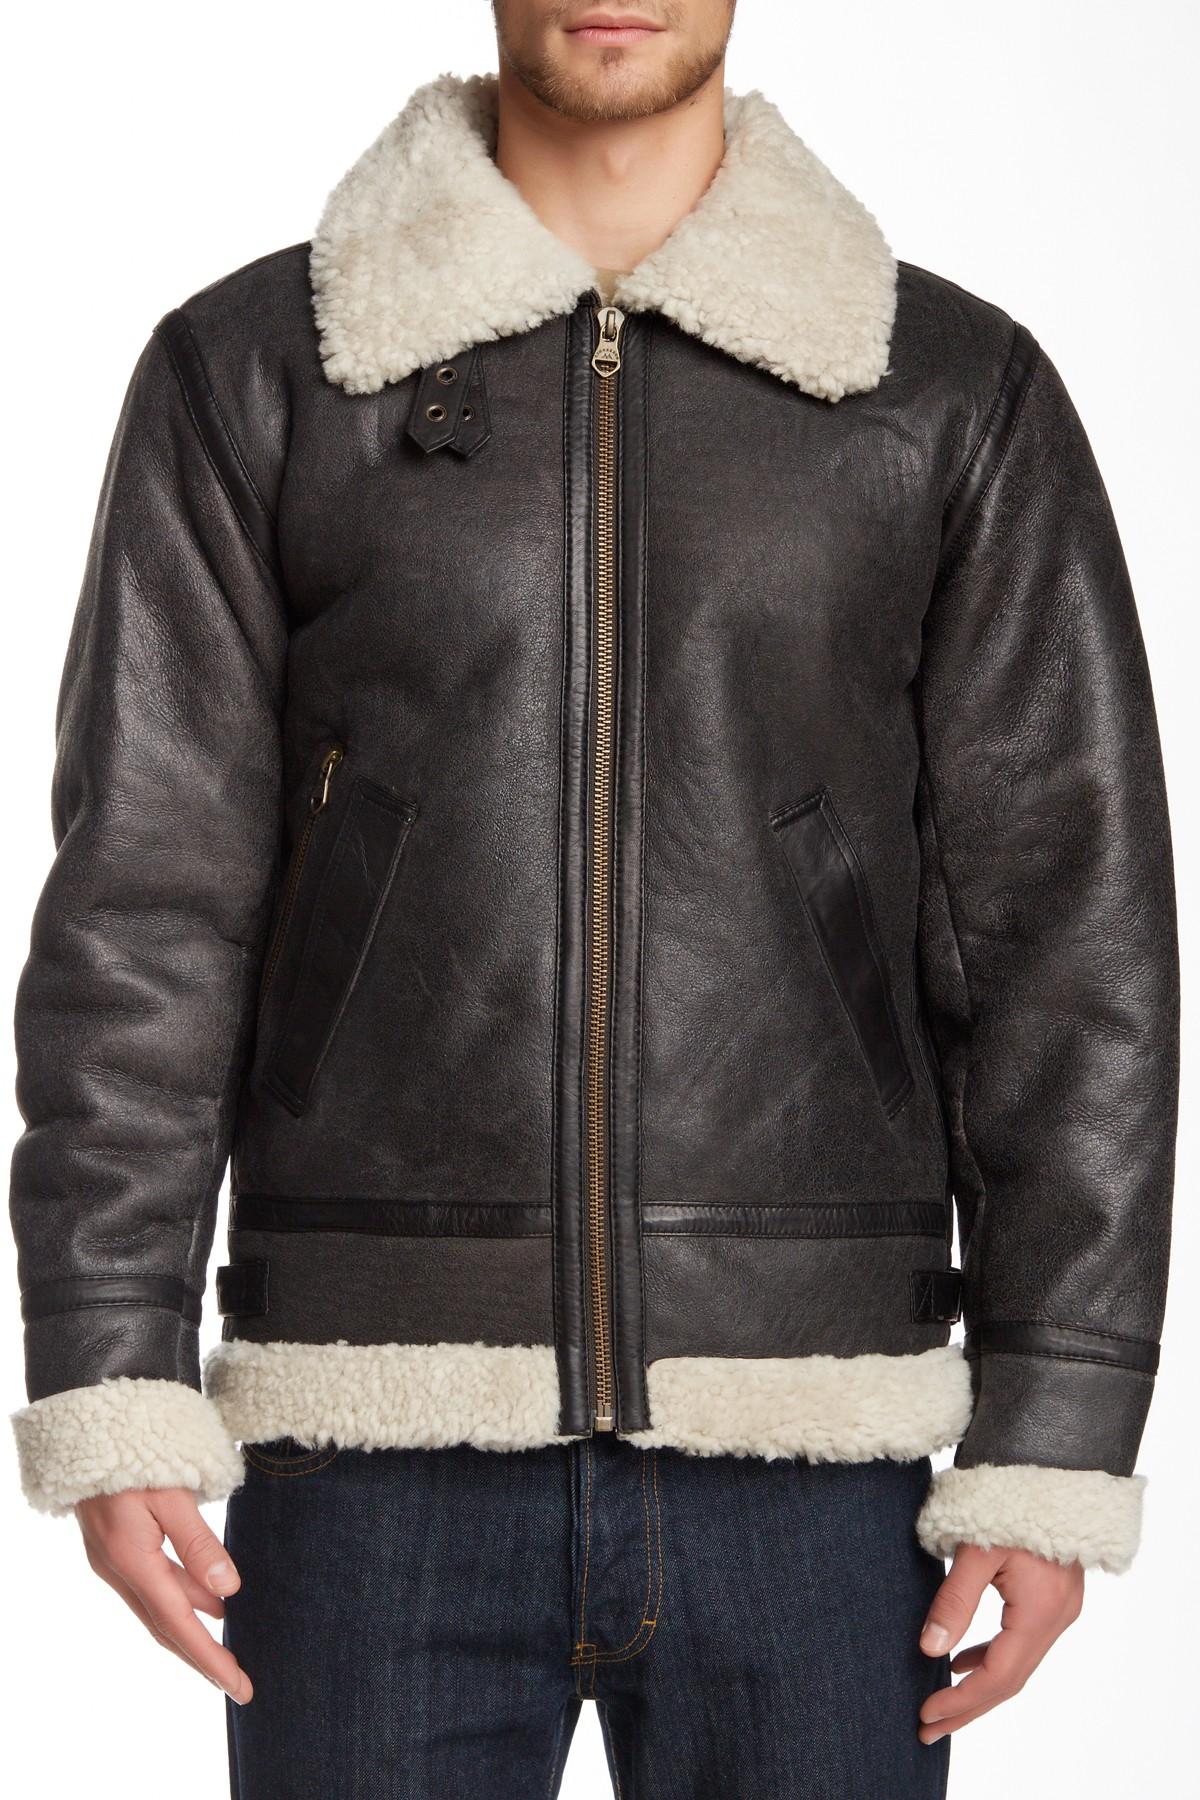 Lindbergh Genuine Shearling Lined Leather Jacket in Brown for Men - Lyst